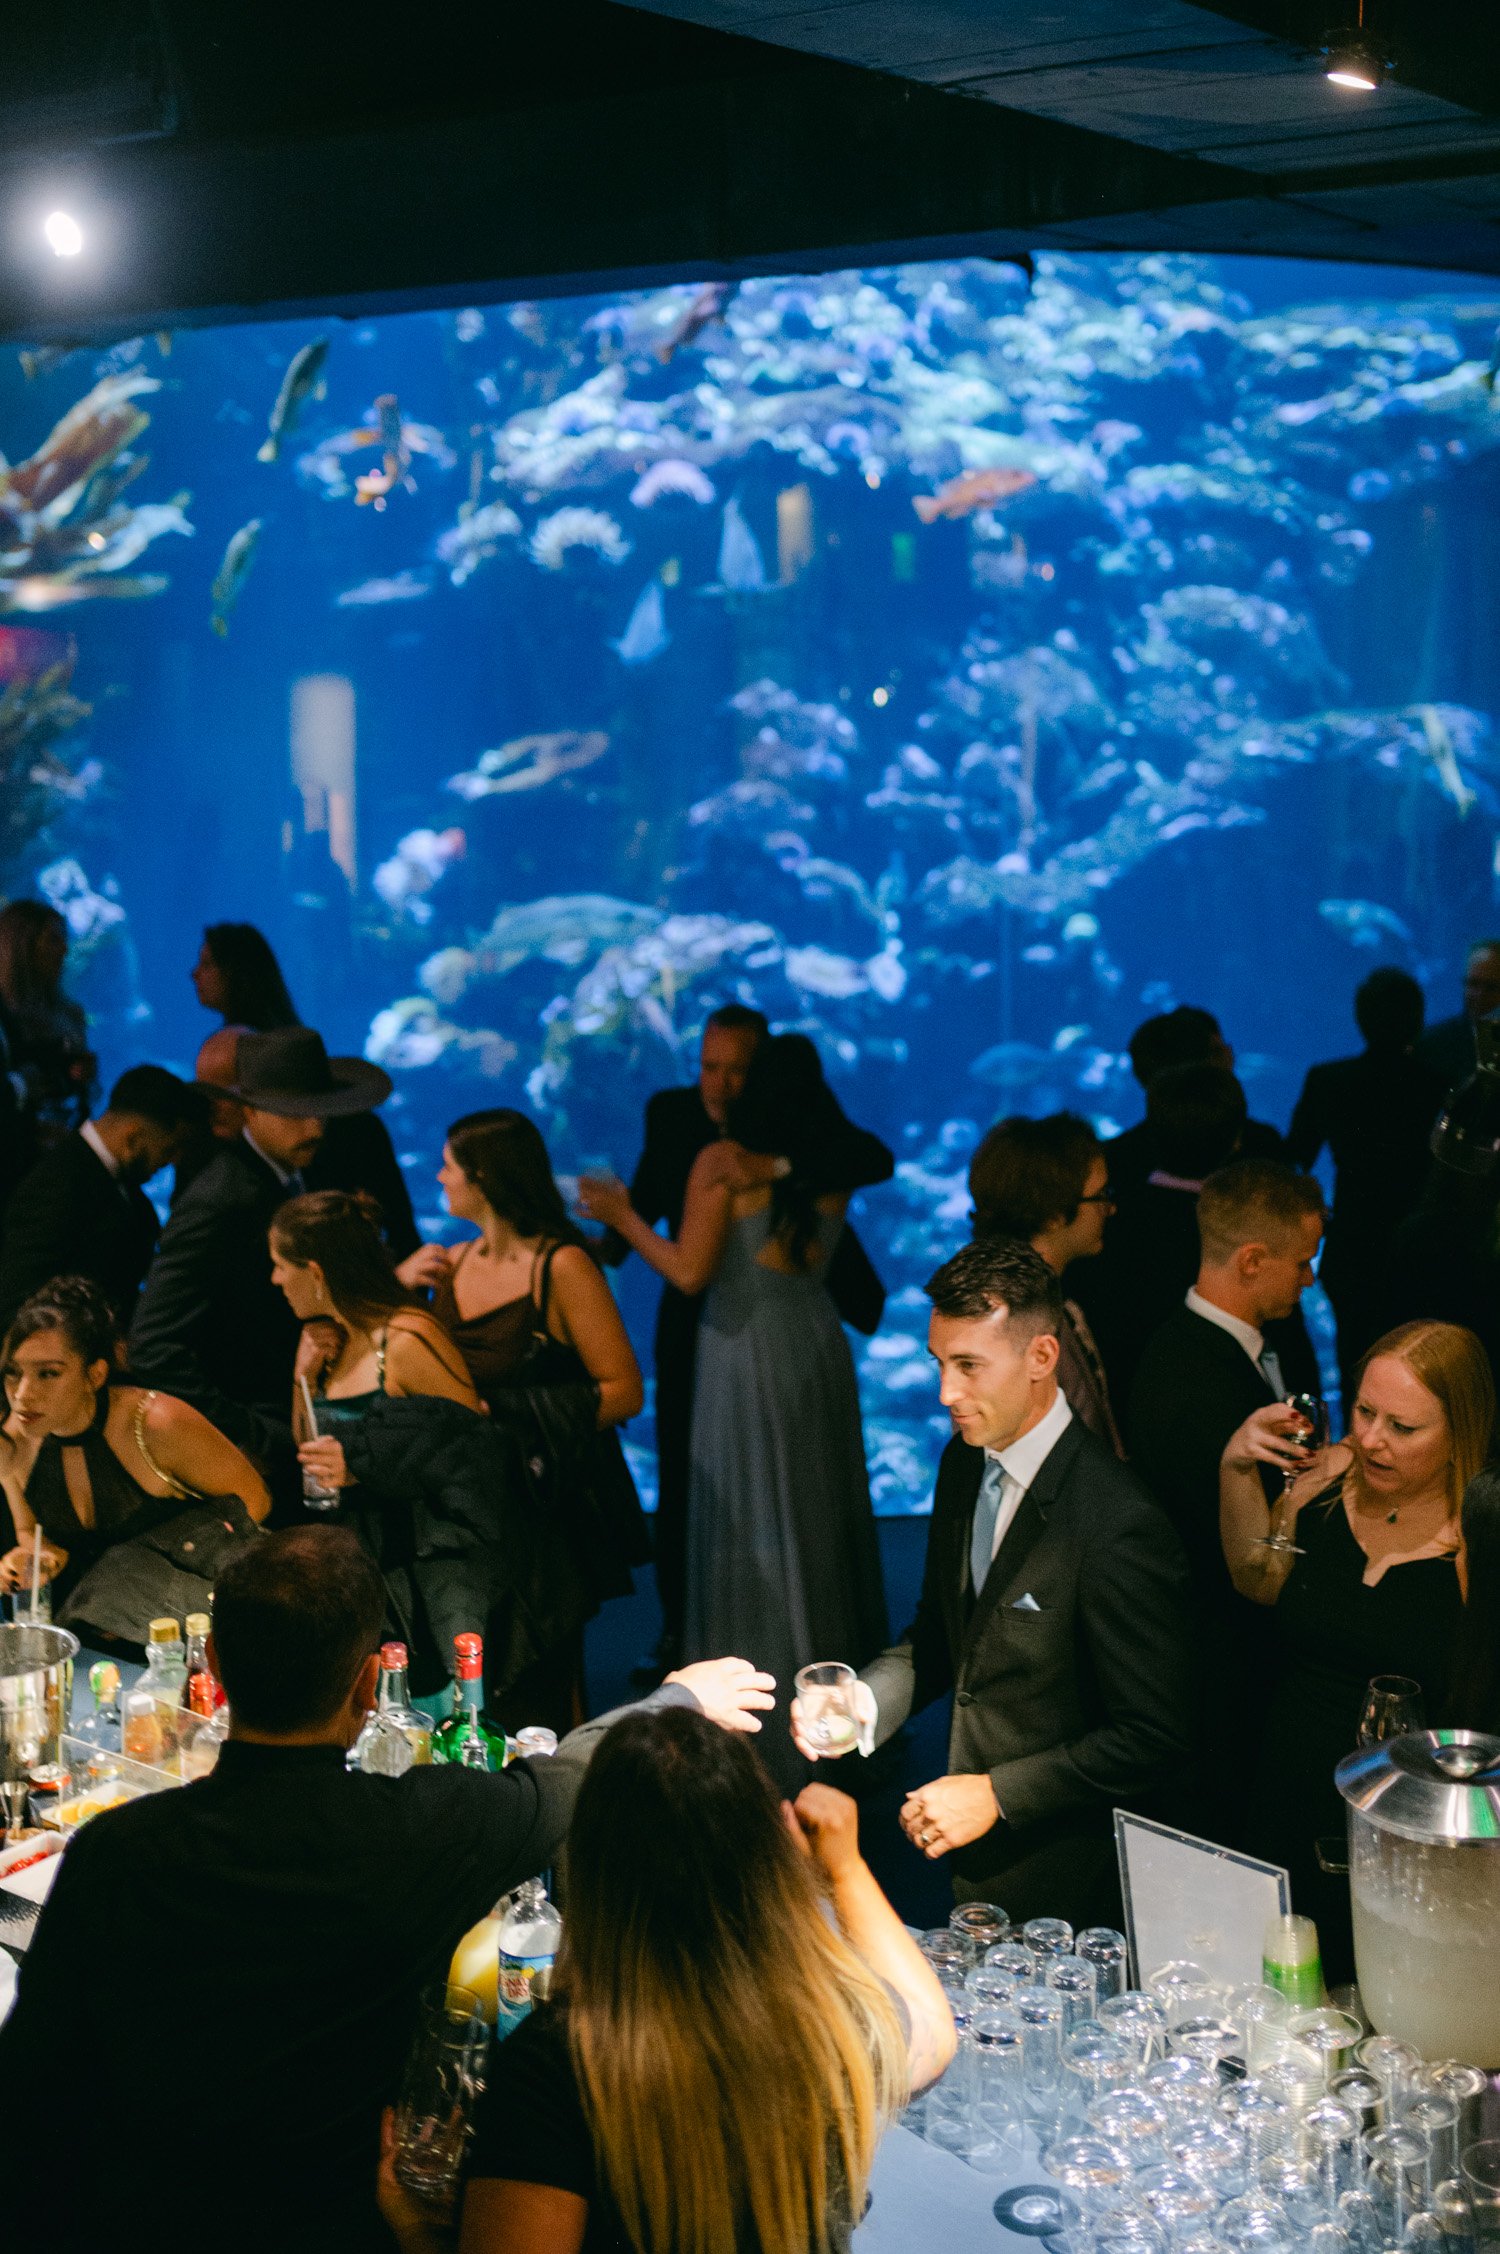 California academy of Sciences in San Francisco Wedding, photo of the wedding guests enjoying during the drinks reception in the aquarium